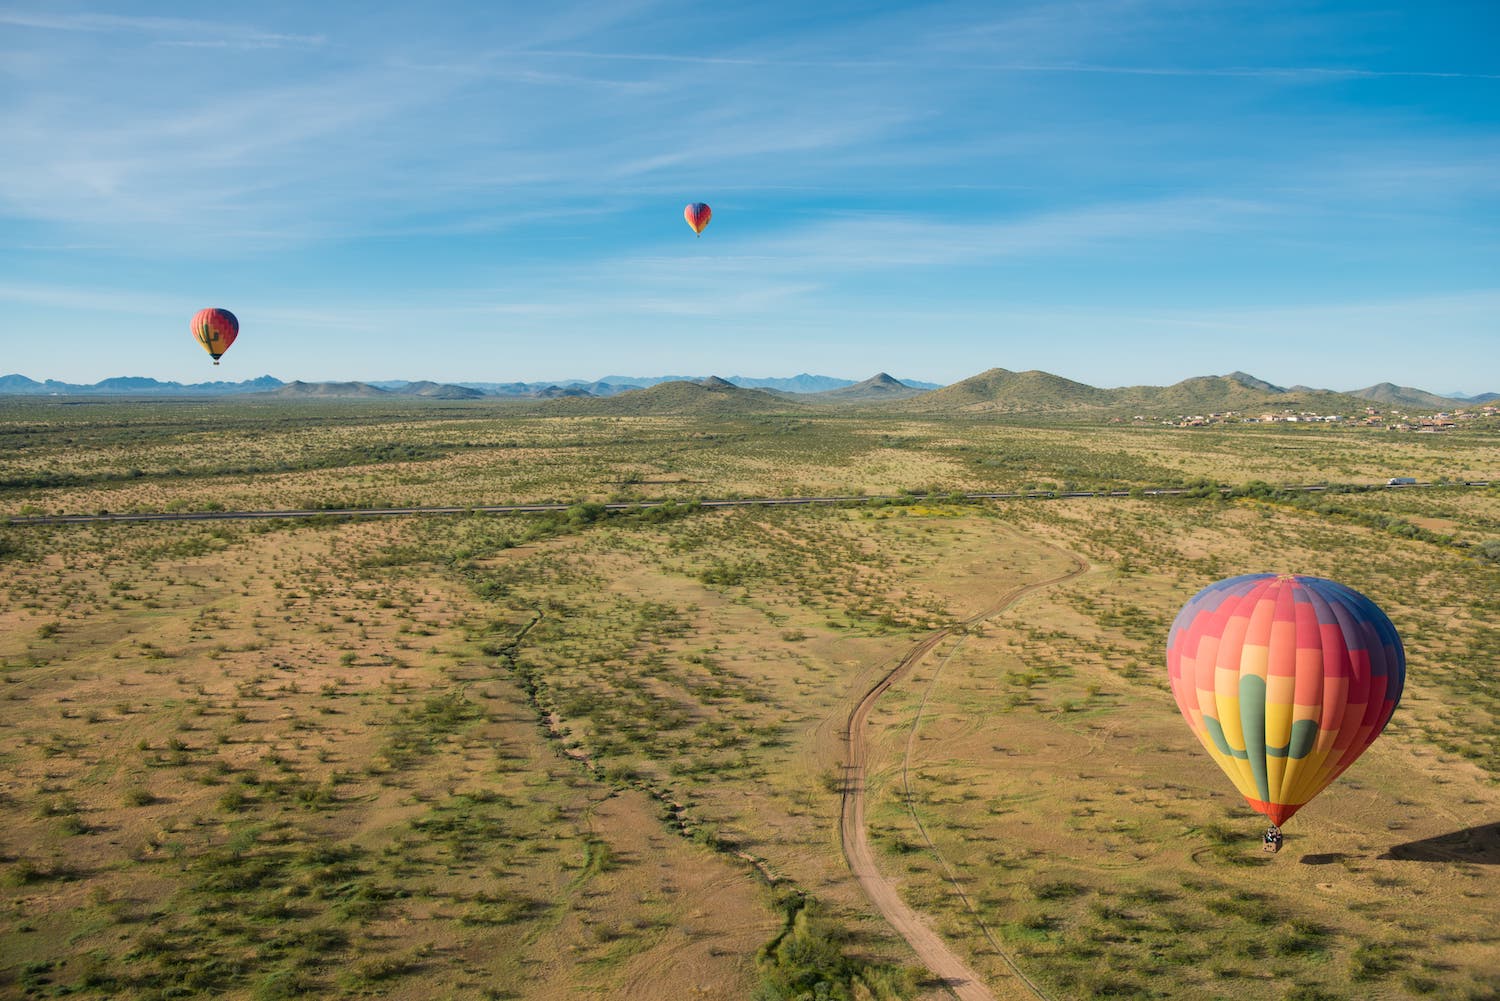 Hot air balloon rides from Hot Air Expeditions in Scottsdale a popular travel destination and fun thing to do in Arizona